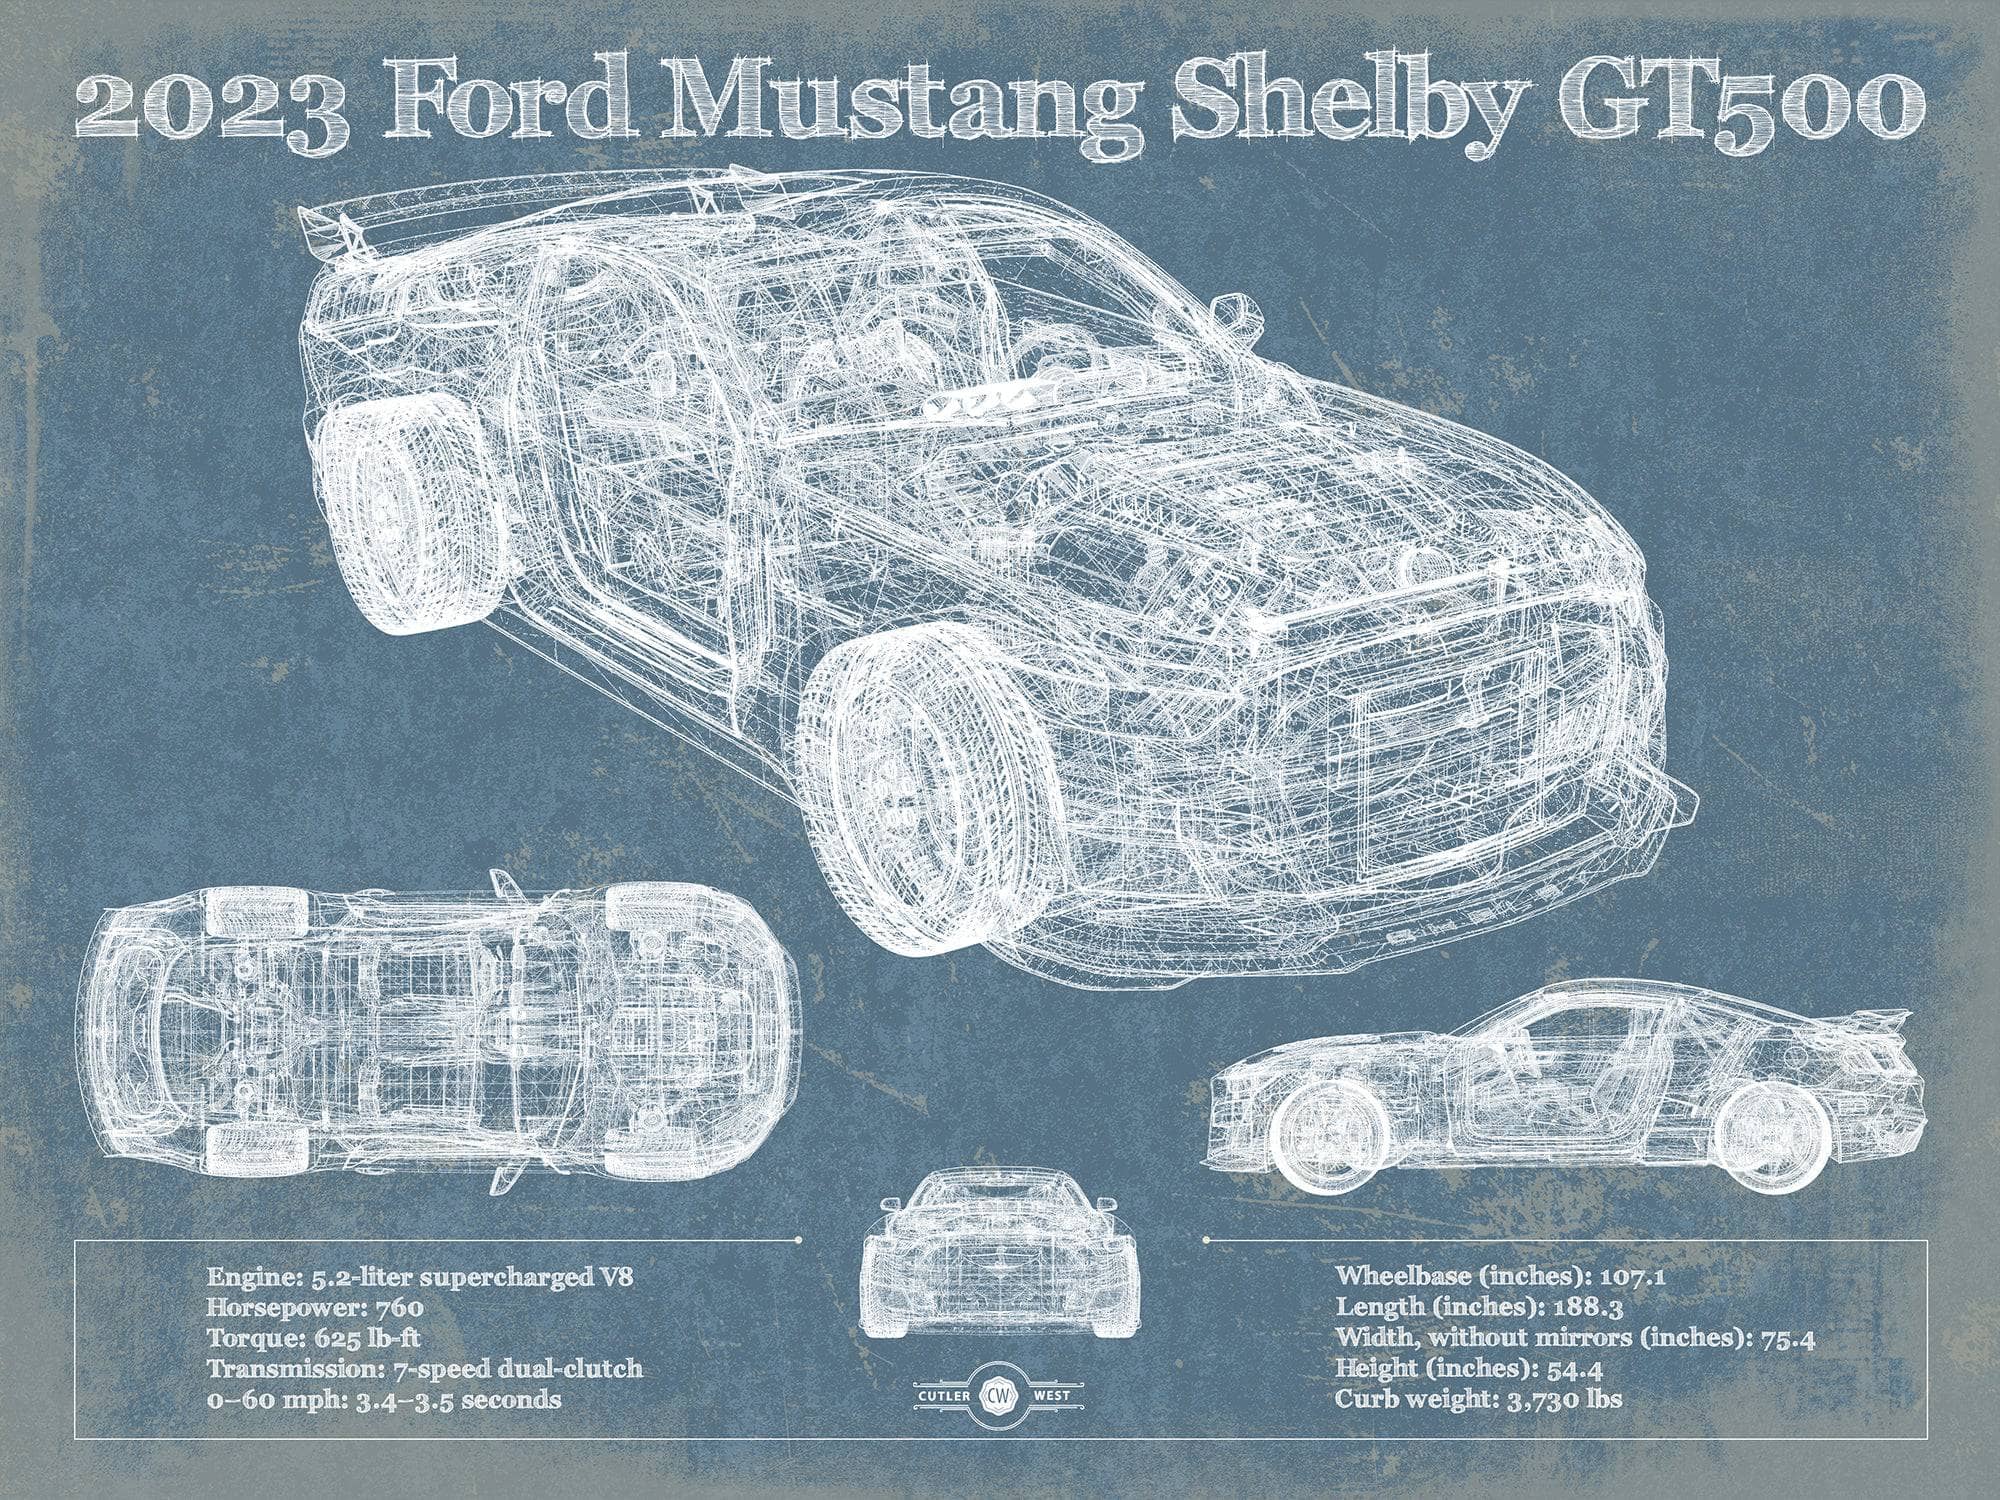 2023 Ford Mustang Shelby GT500 Blueprint Vintage Auto Print